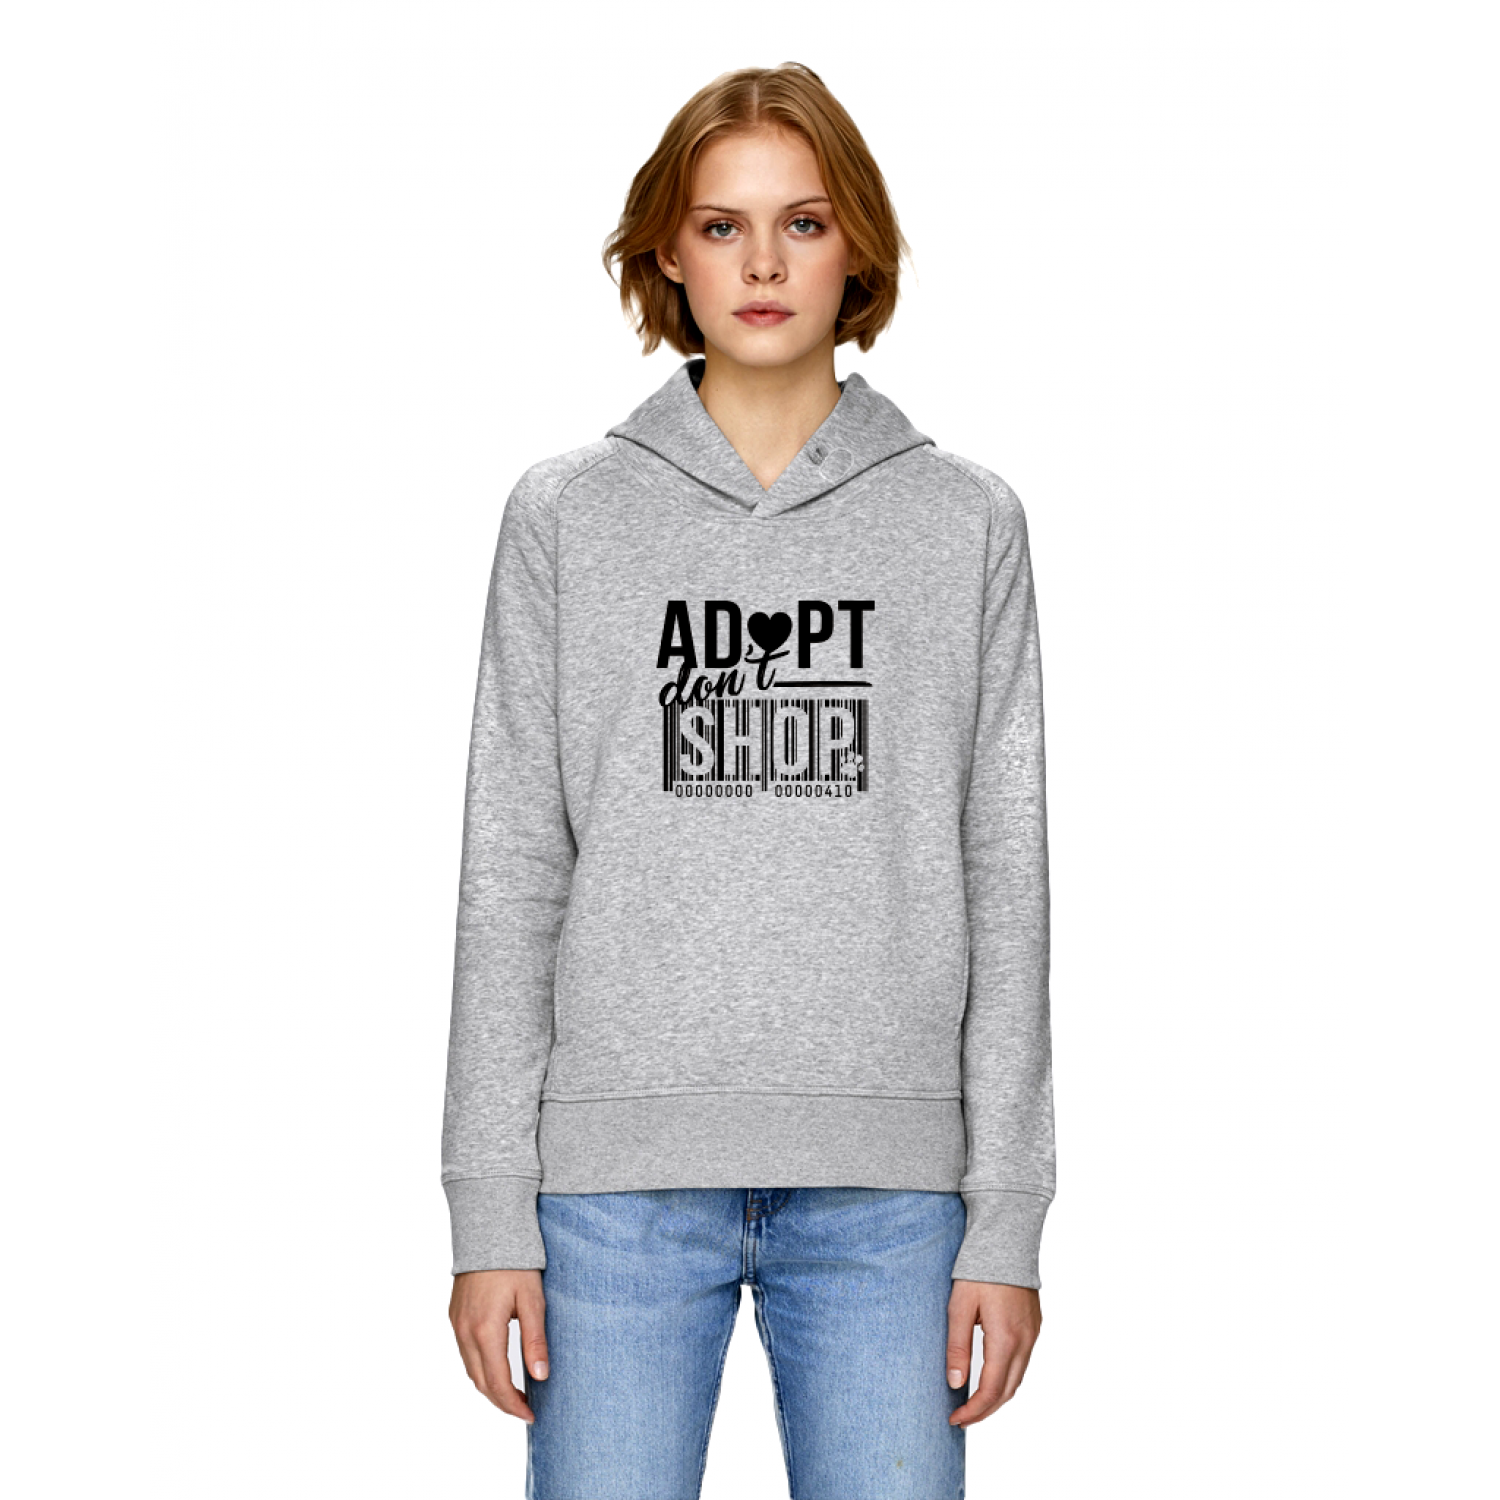 ADOPT DON'T SHOP Hoodie (Charity Project)